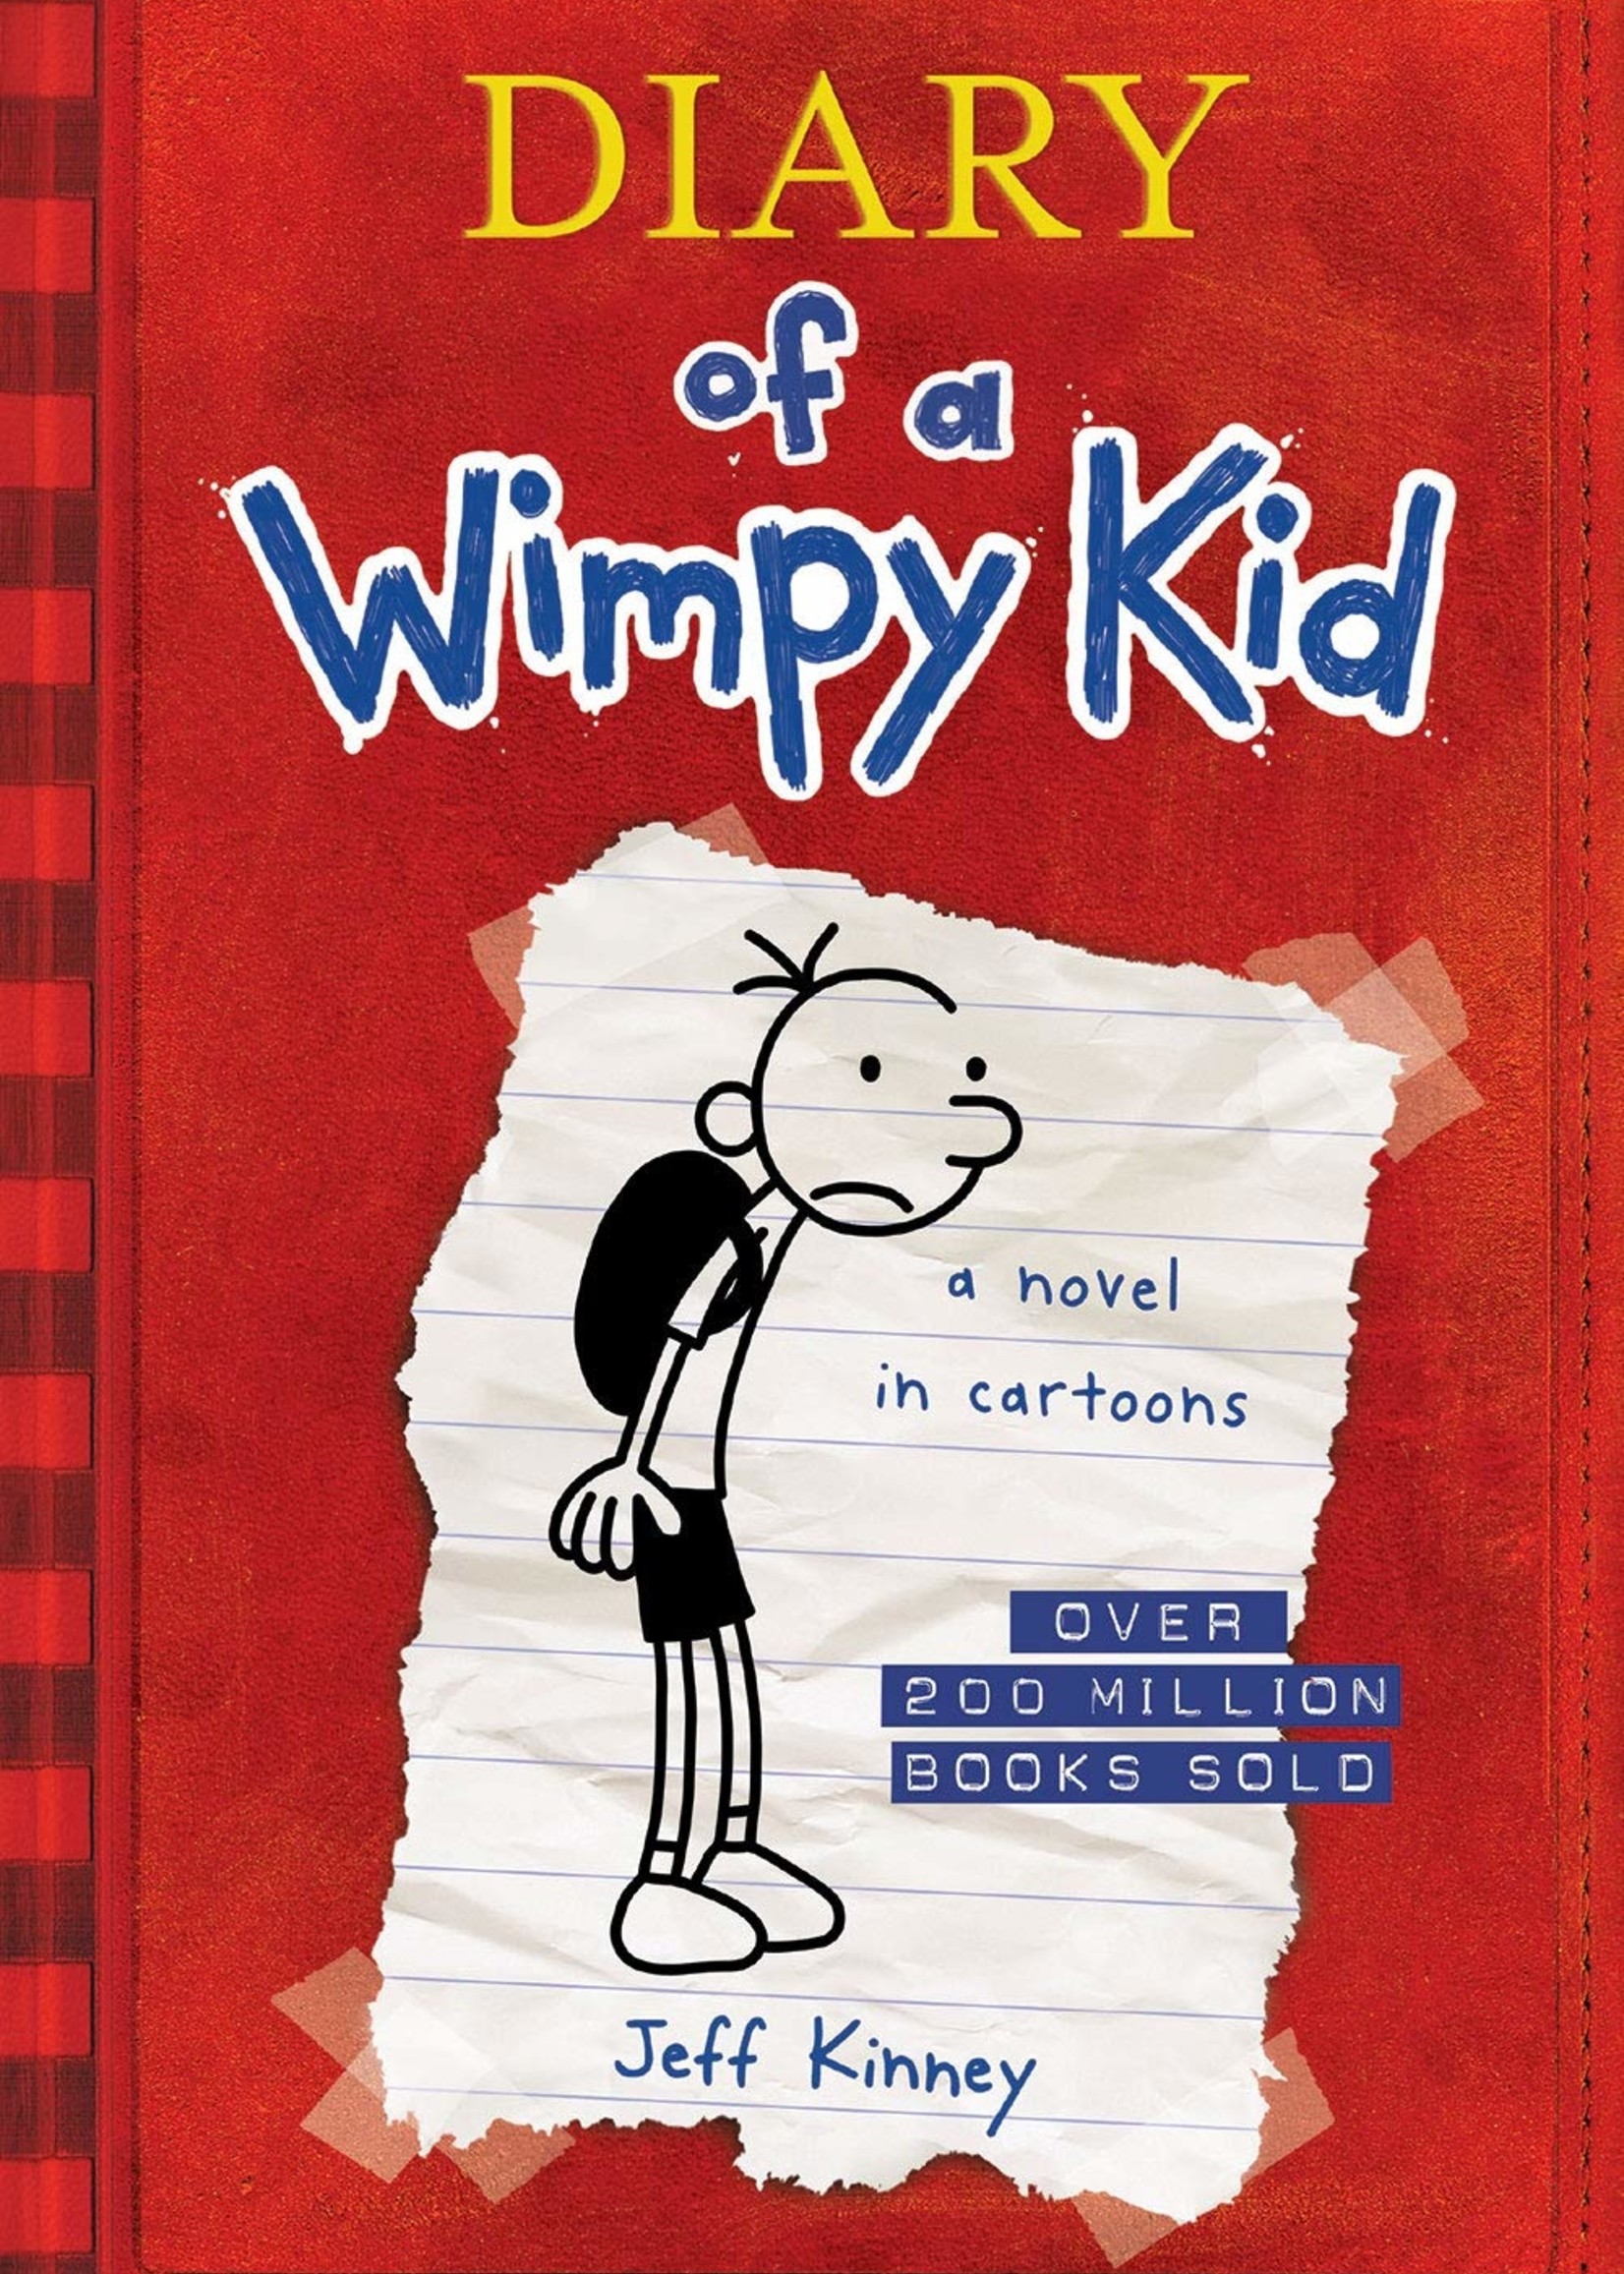 Diary of a Wimpy Kid Illustrated Novel #01 - Hardcover